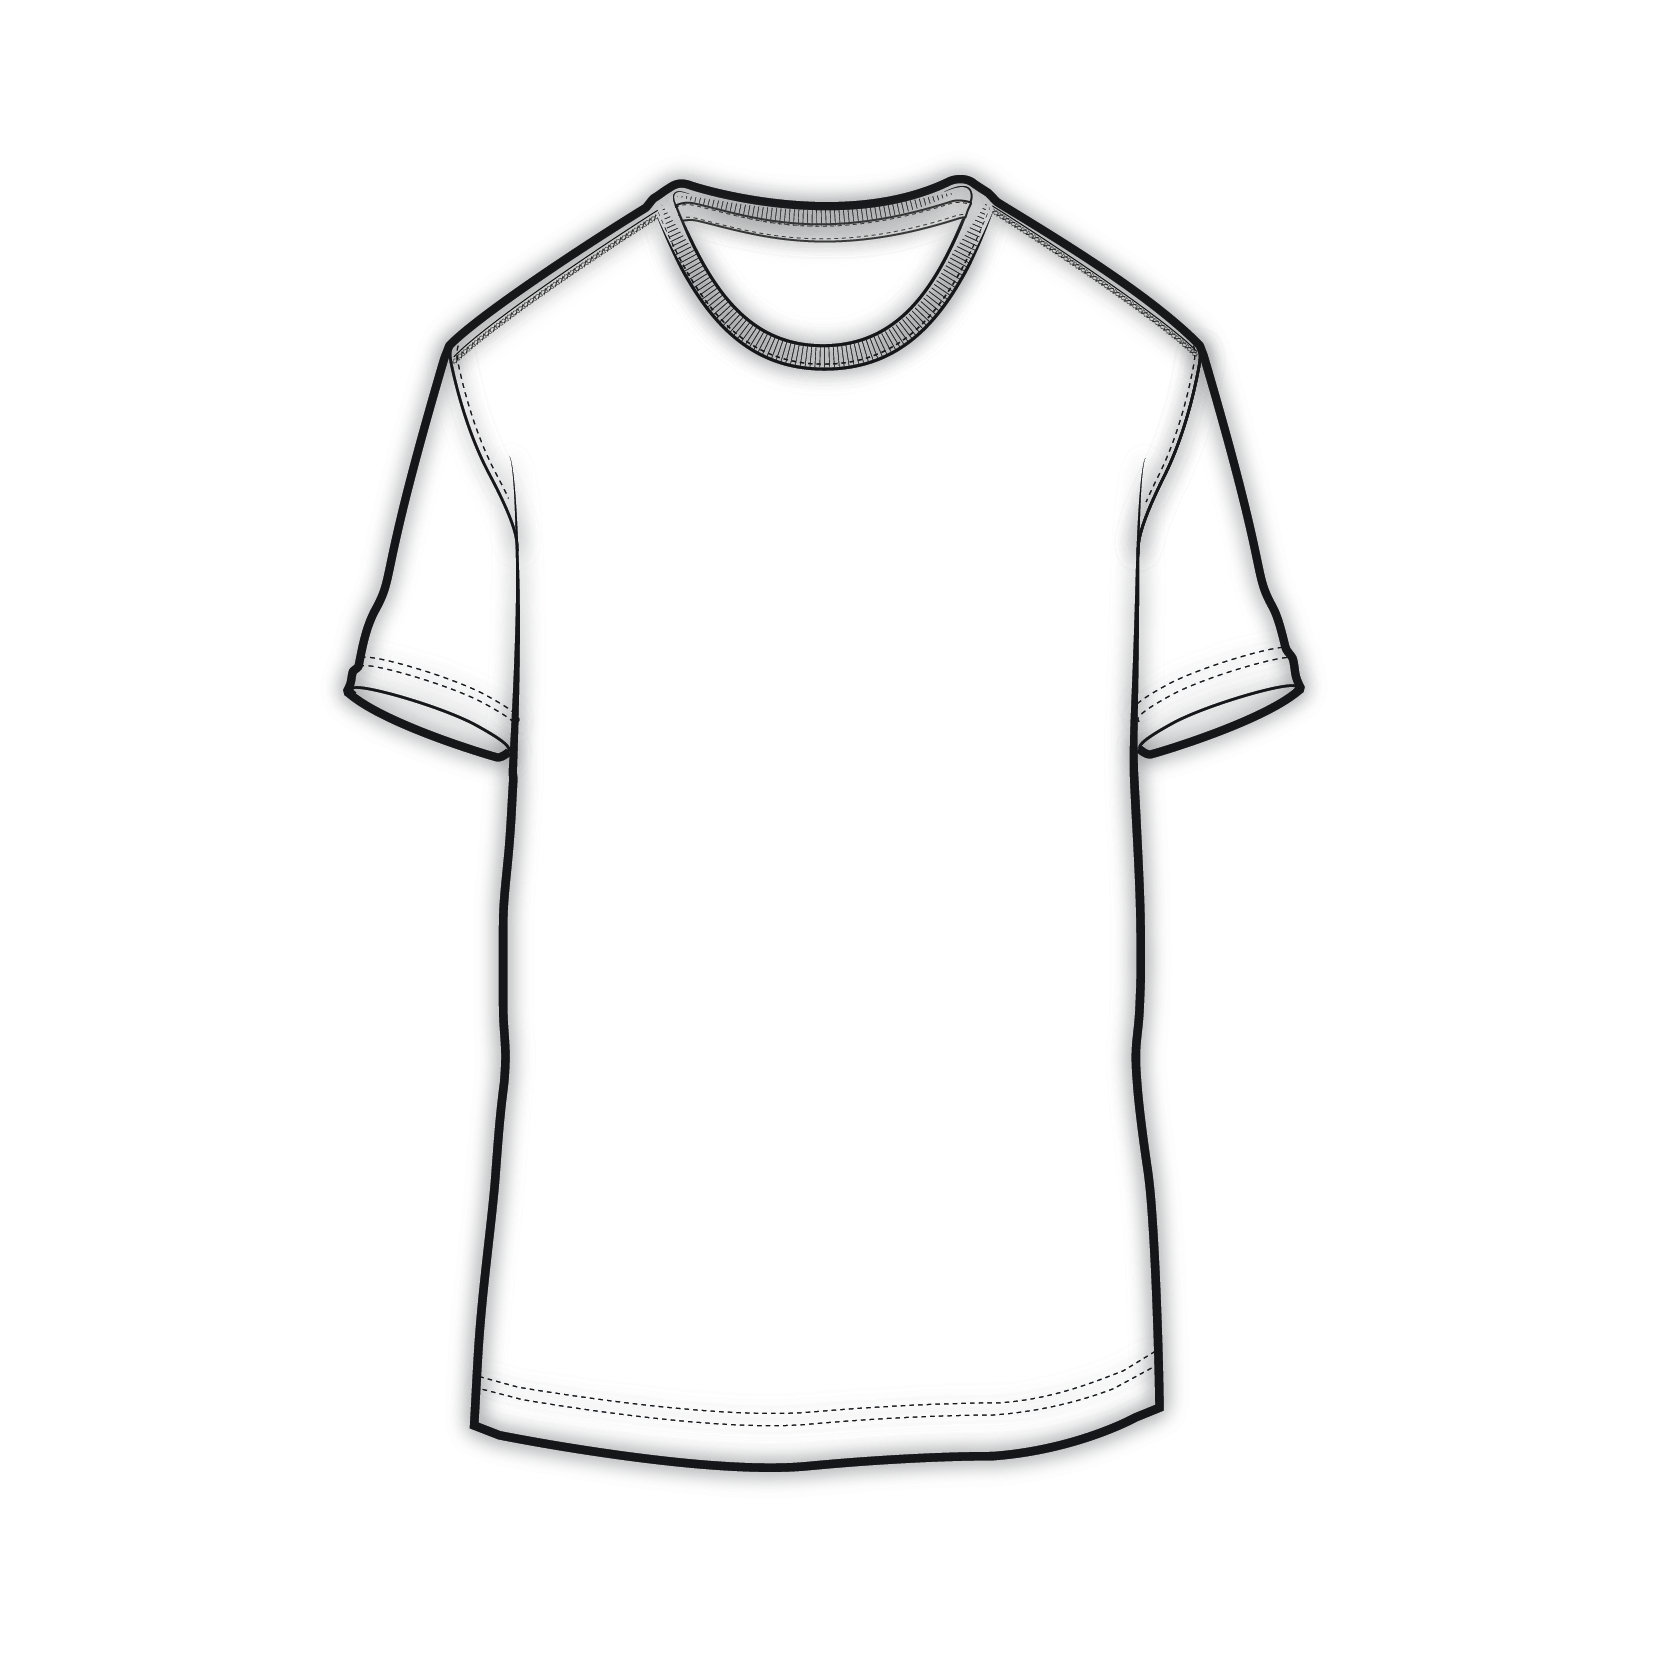 tee without pocket-01.jpg